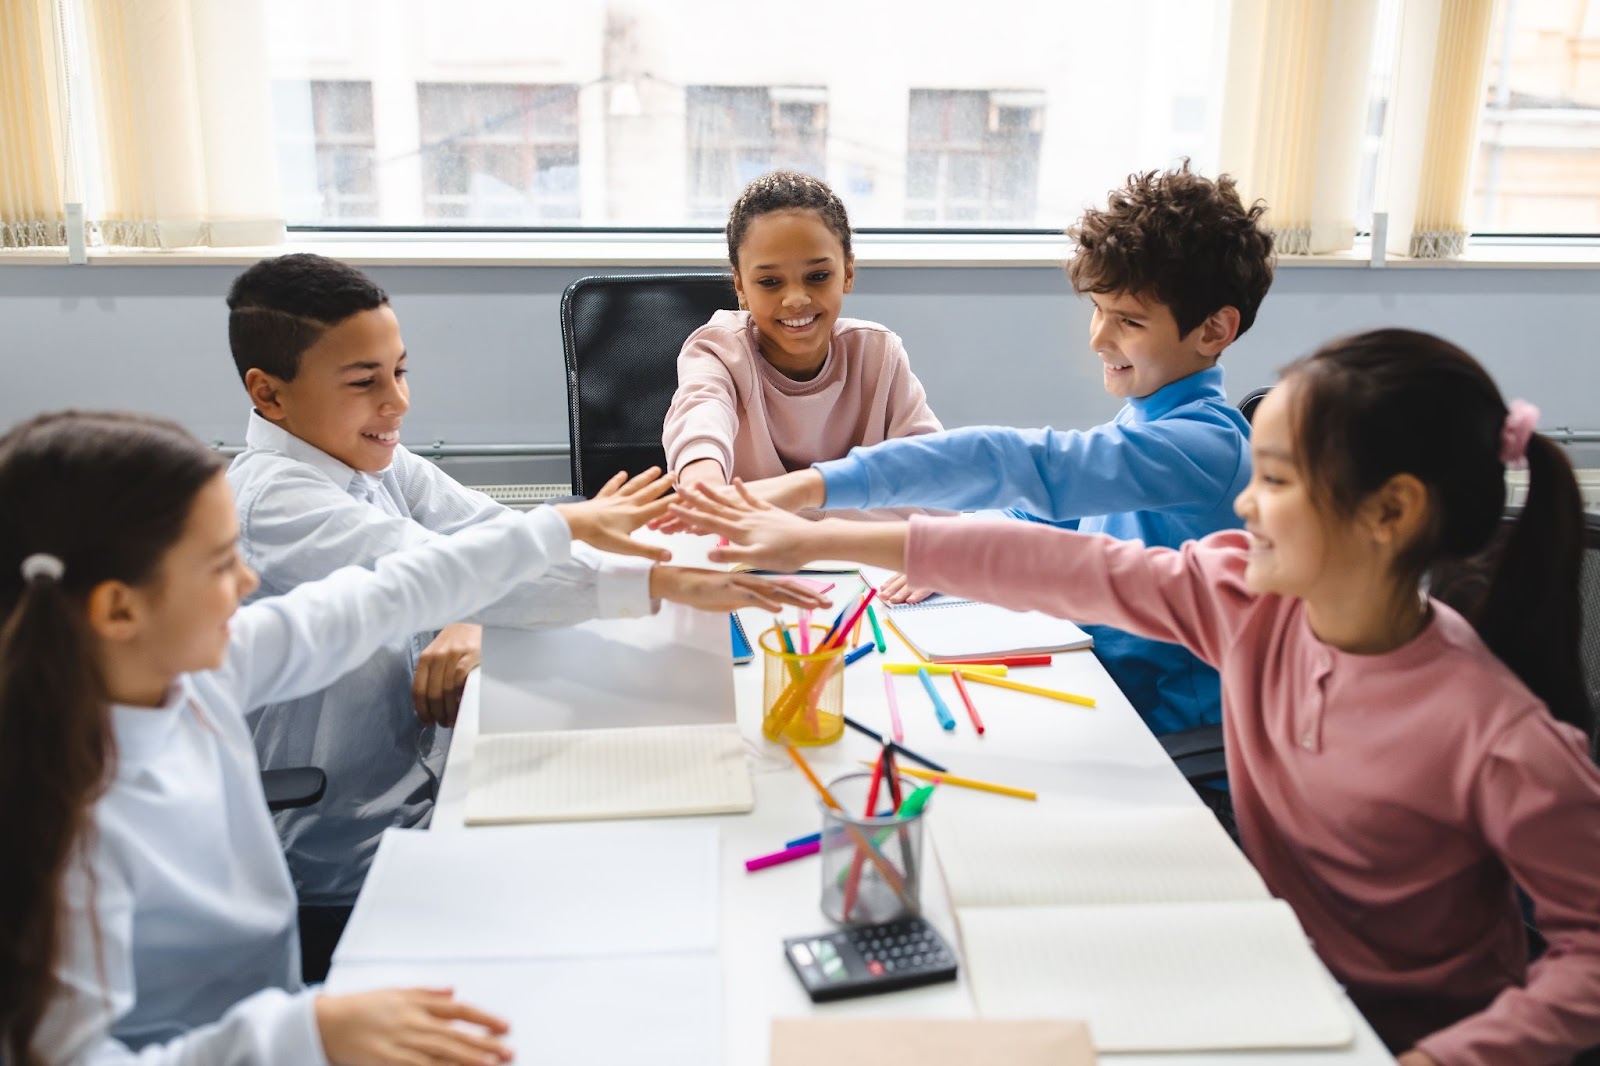 Strategies To Create A Positive Learning Environment In Your Classroom: Foster Student Connections